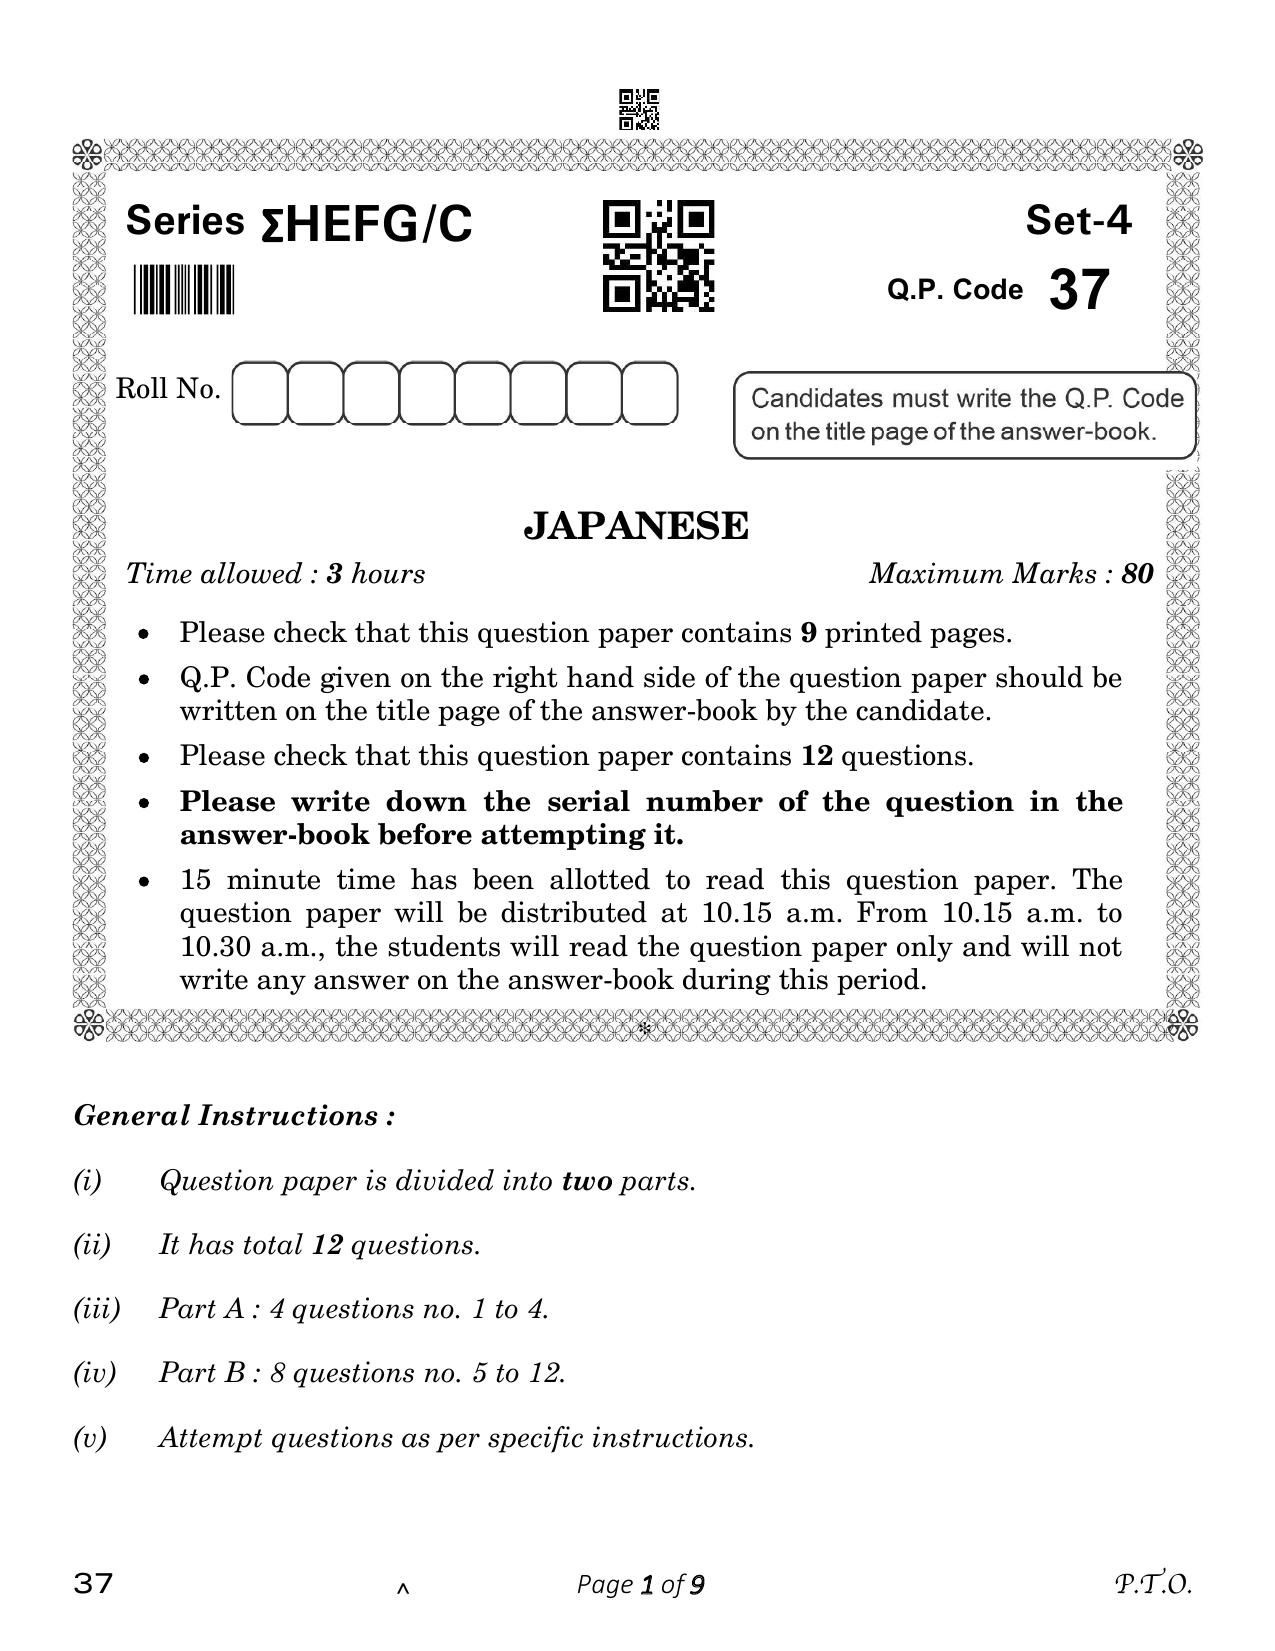 CBSE Class 12 Japanese (Compartment) 2023 Question Paper - Page 1